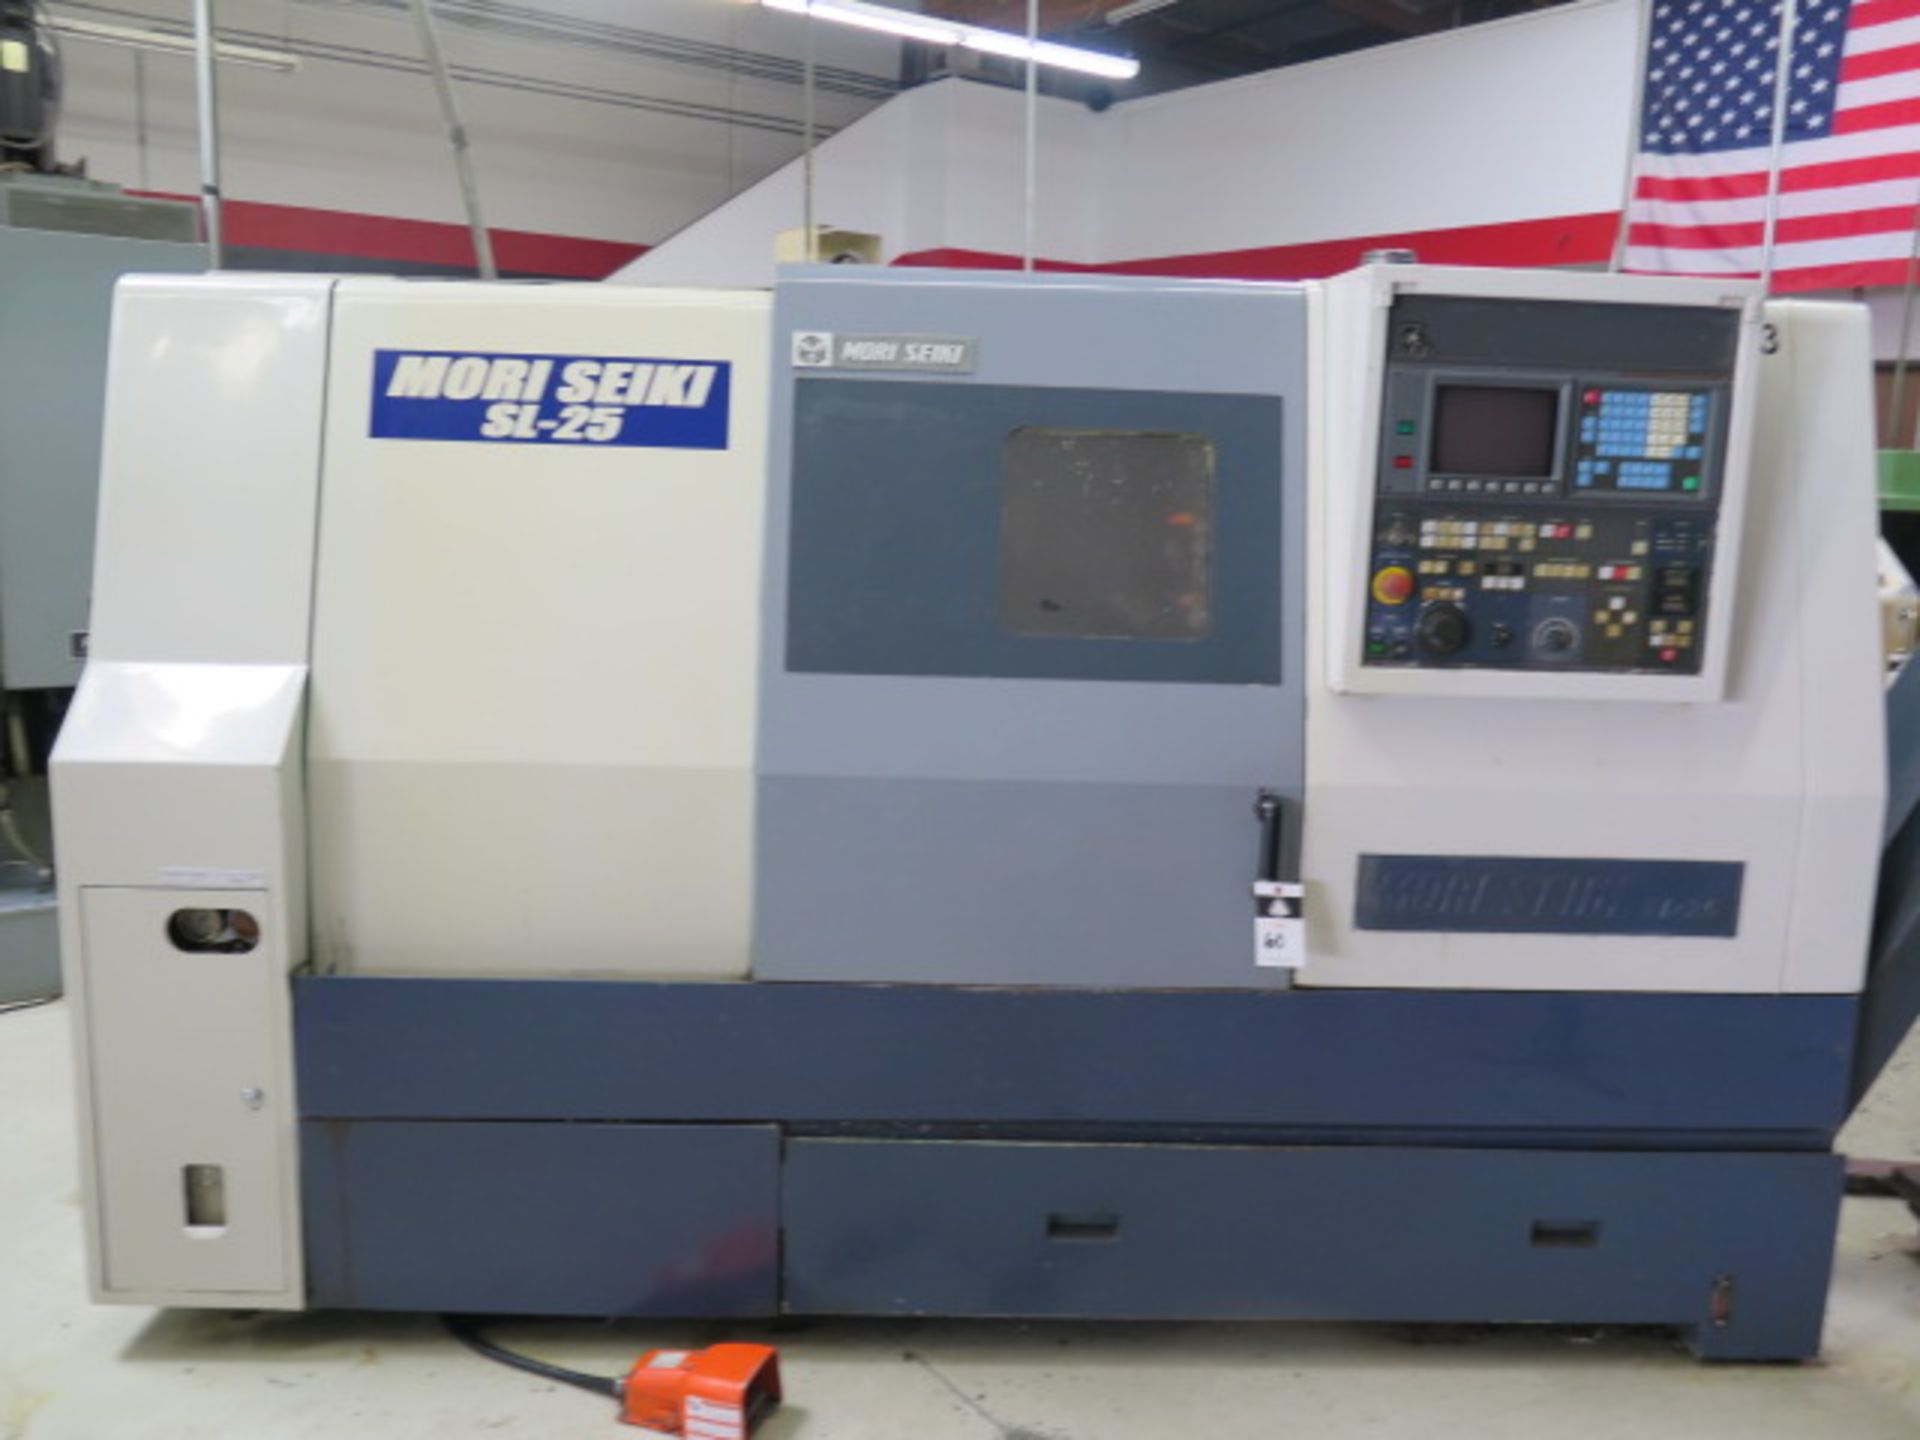 Moti Seiki SL-25BS CNC Turning Center s/n 5102 w/ Fanuc Cont, Tool Presetter, 10-Station, SOLD AS IS